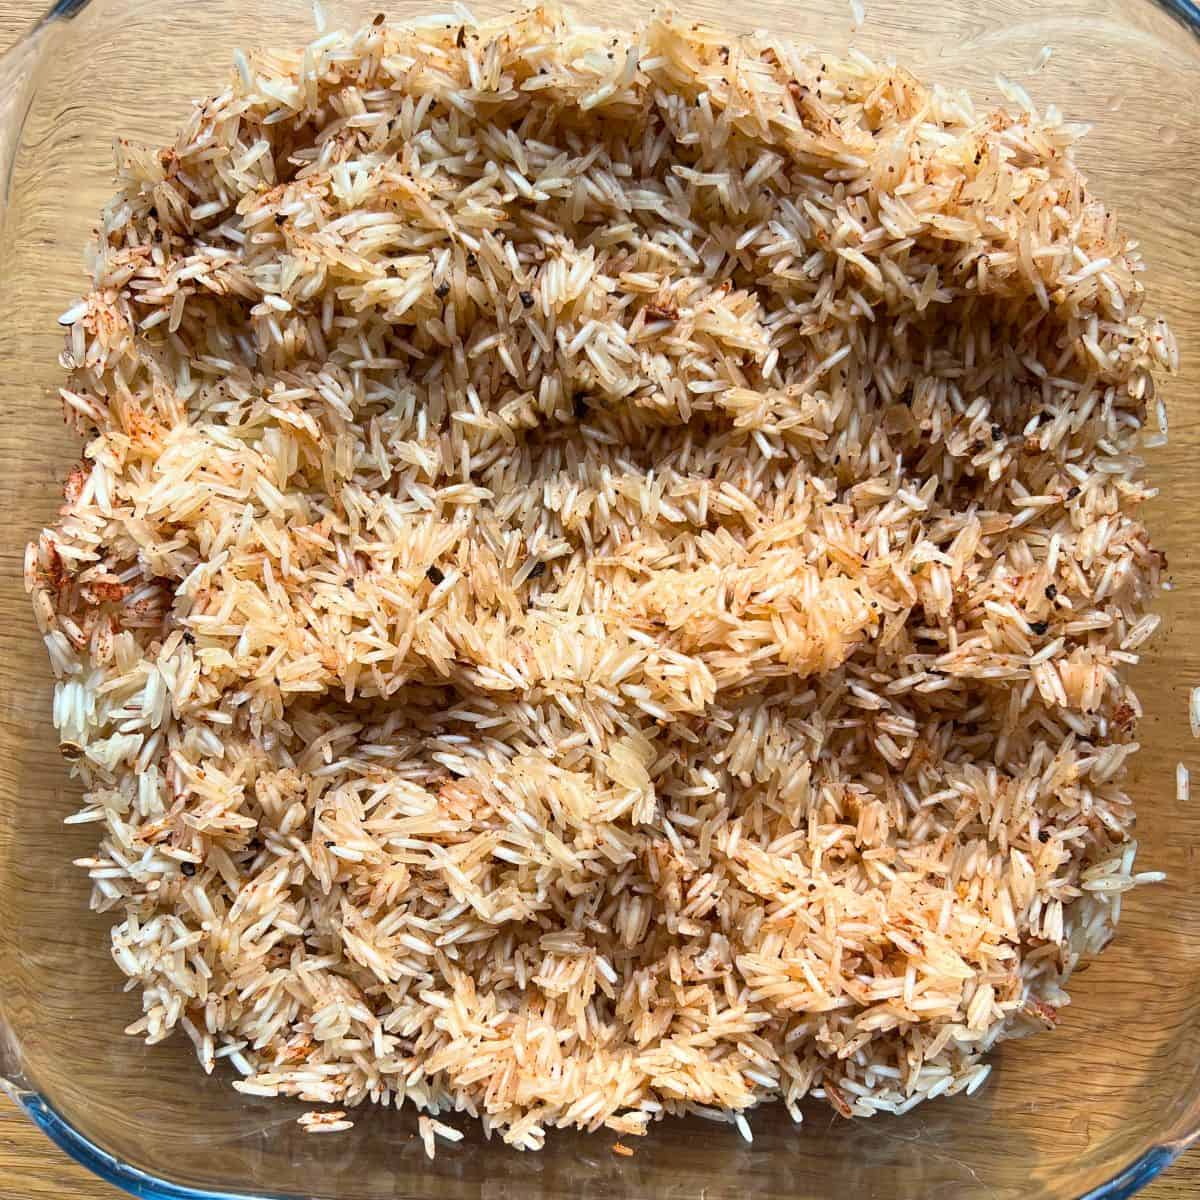 Seasoned raw rice in a glass container.